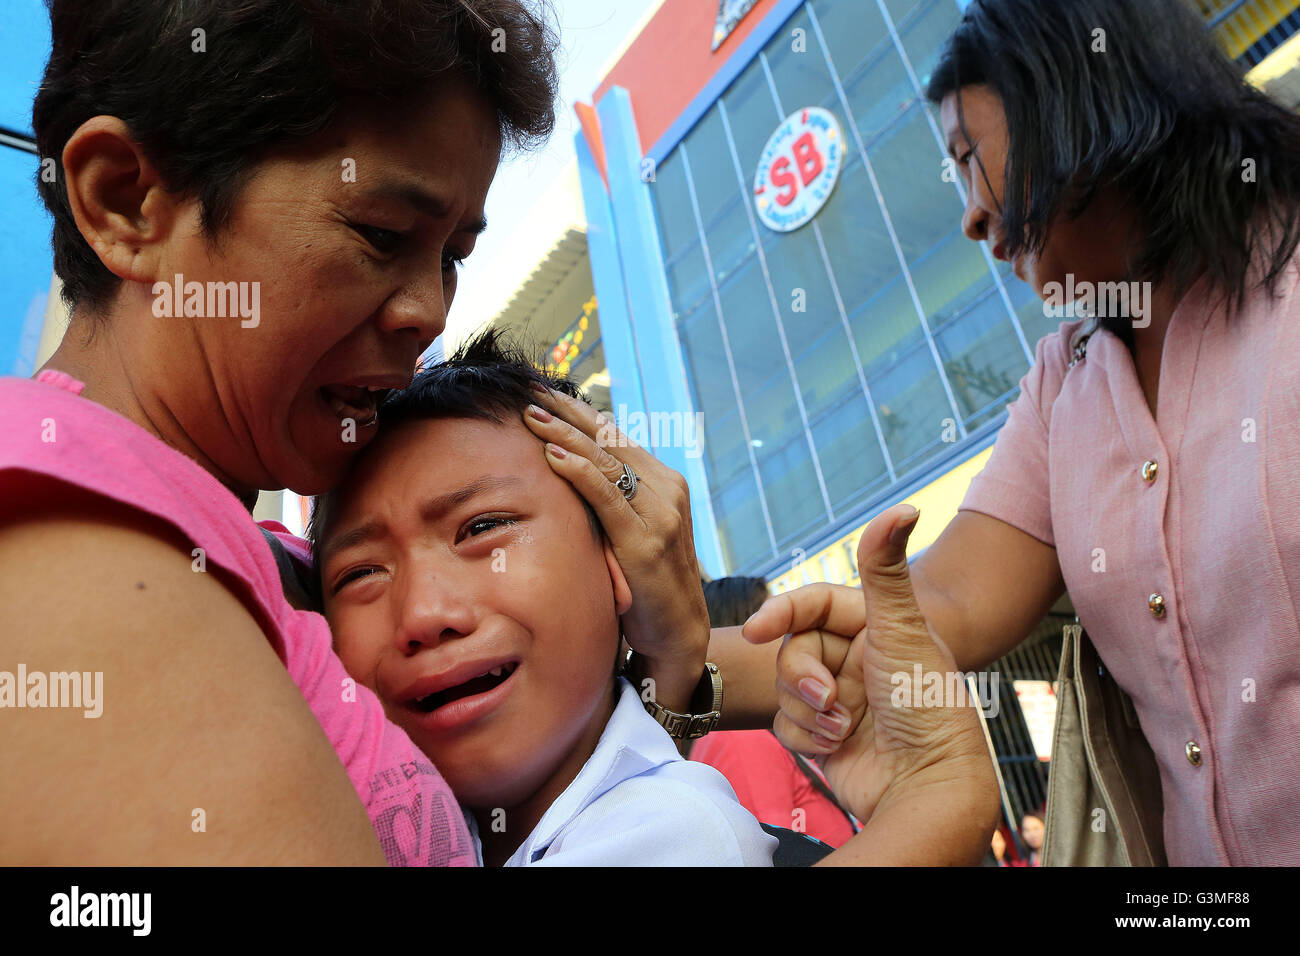 (160613) -- QUEZON CITY (THE PHILIPPINES), June 13, 2016 (Xinhua) -- A student cries during the first day of school at the President Corazon Aquino Elementary School in Quezon City, the Philippines, on June 13, 2016. Around 25 million students attended elementary and high school classes all over the country at the beginning of the school year 2016-2017, according to the Philippine Department of Education. (Xinhua/Rouelle Umali) Stock Photo